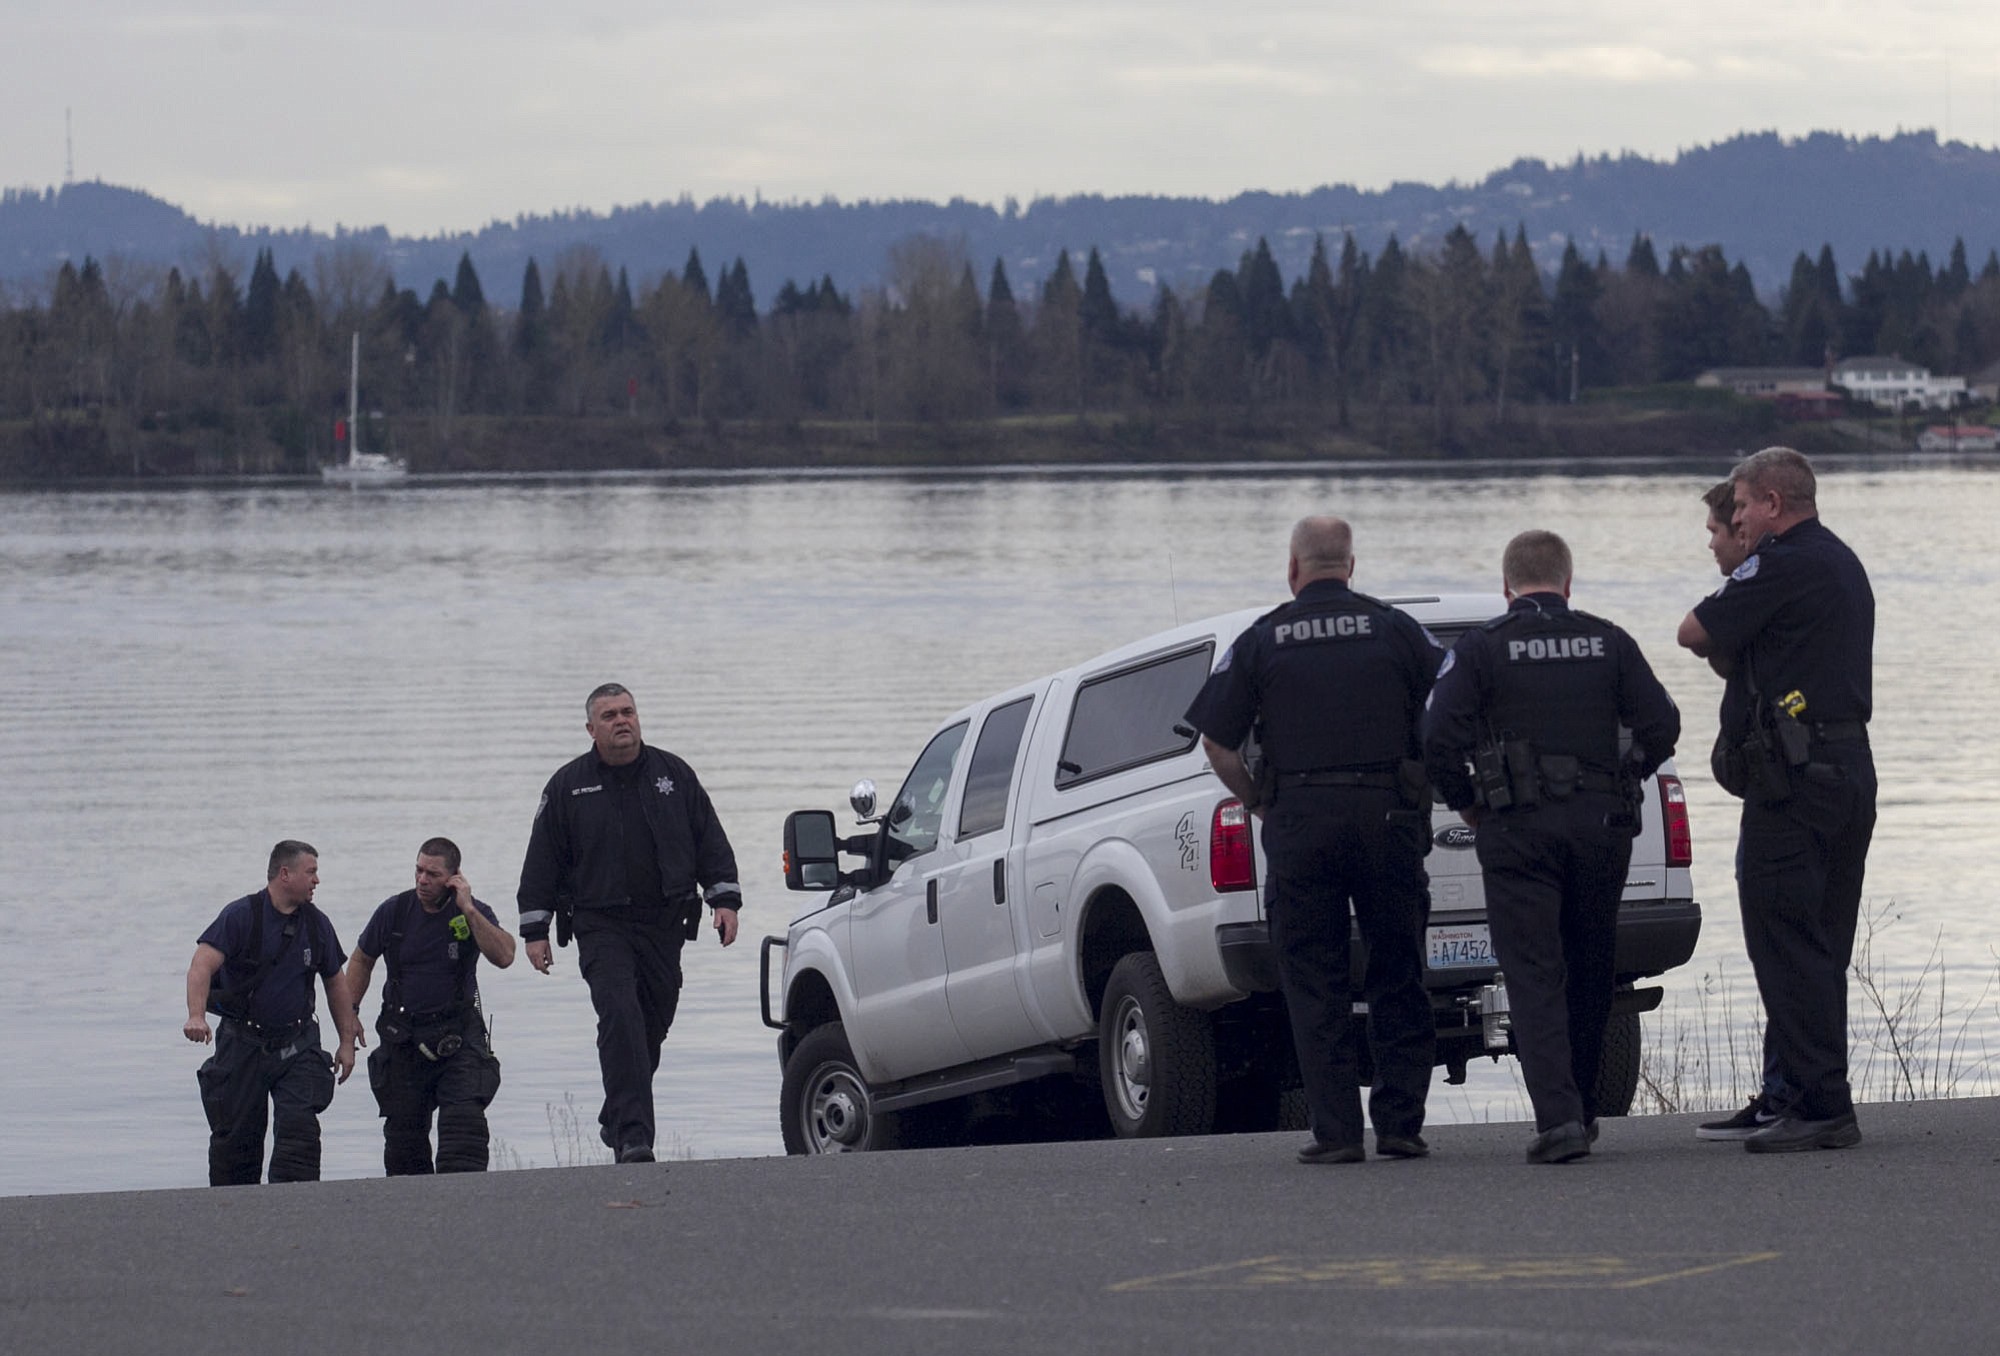 A woman was treated at the scene after she apparently intentionally drove her car into the Columbia River this afternoon at the Marine Park boat launch in Vancouver.